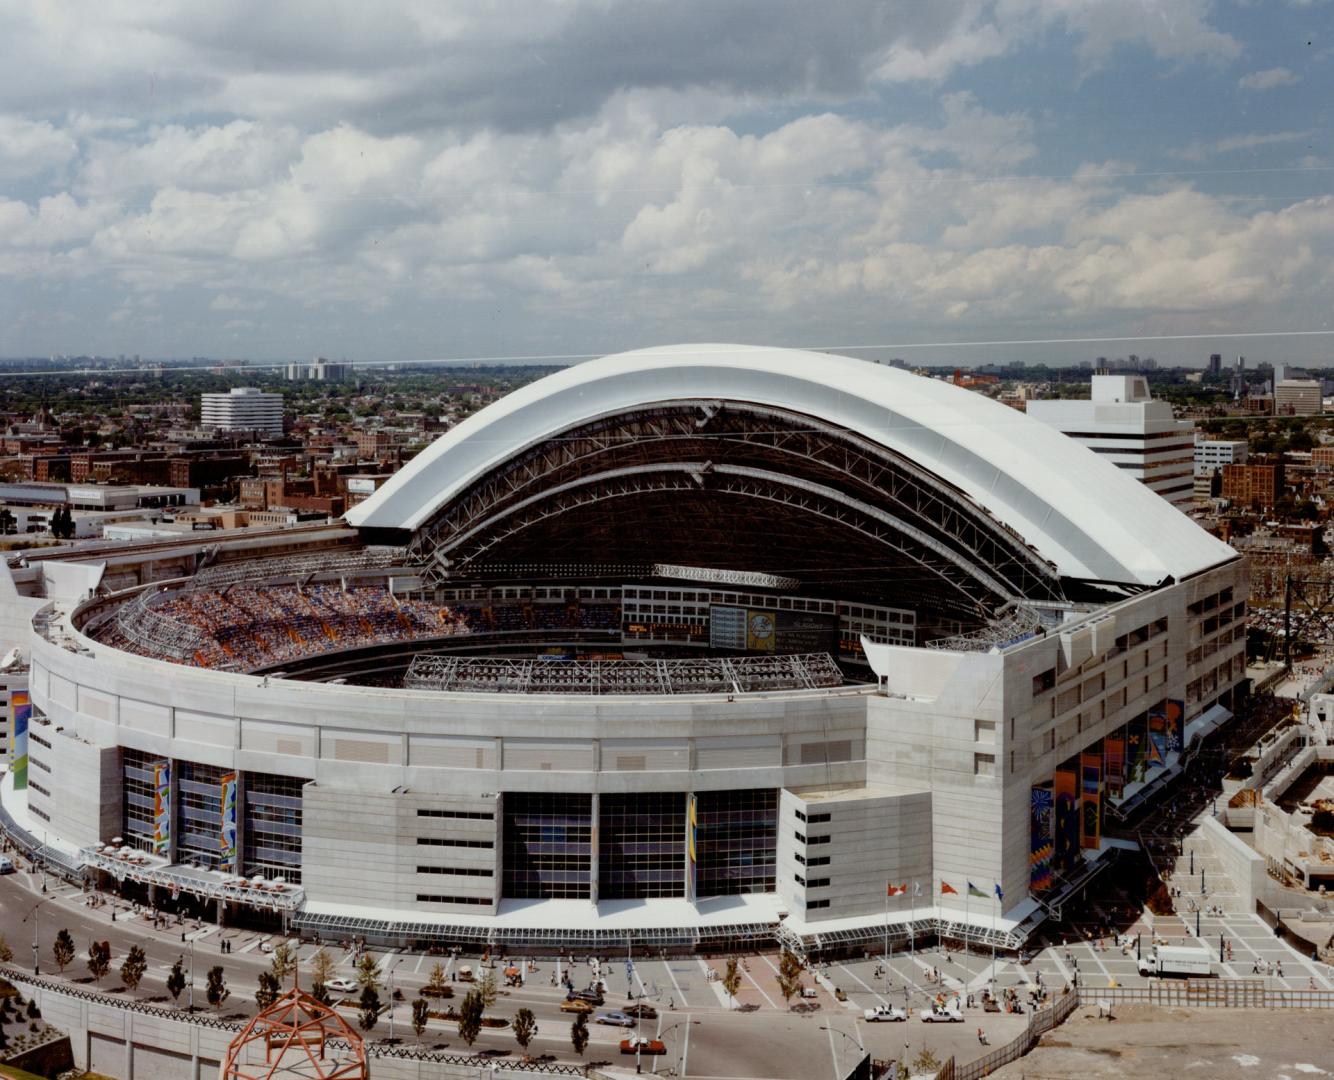 June 3: SkyDome, the world's first retractable roof, opened